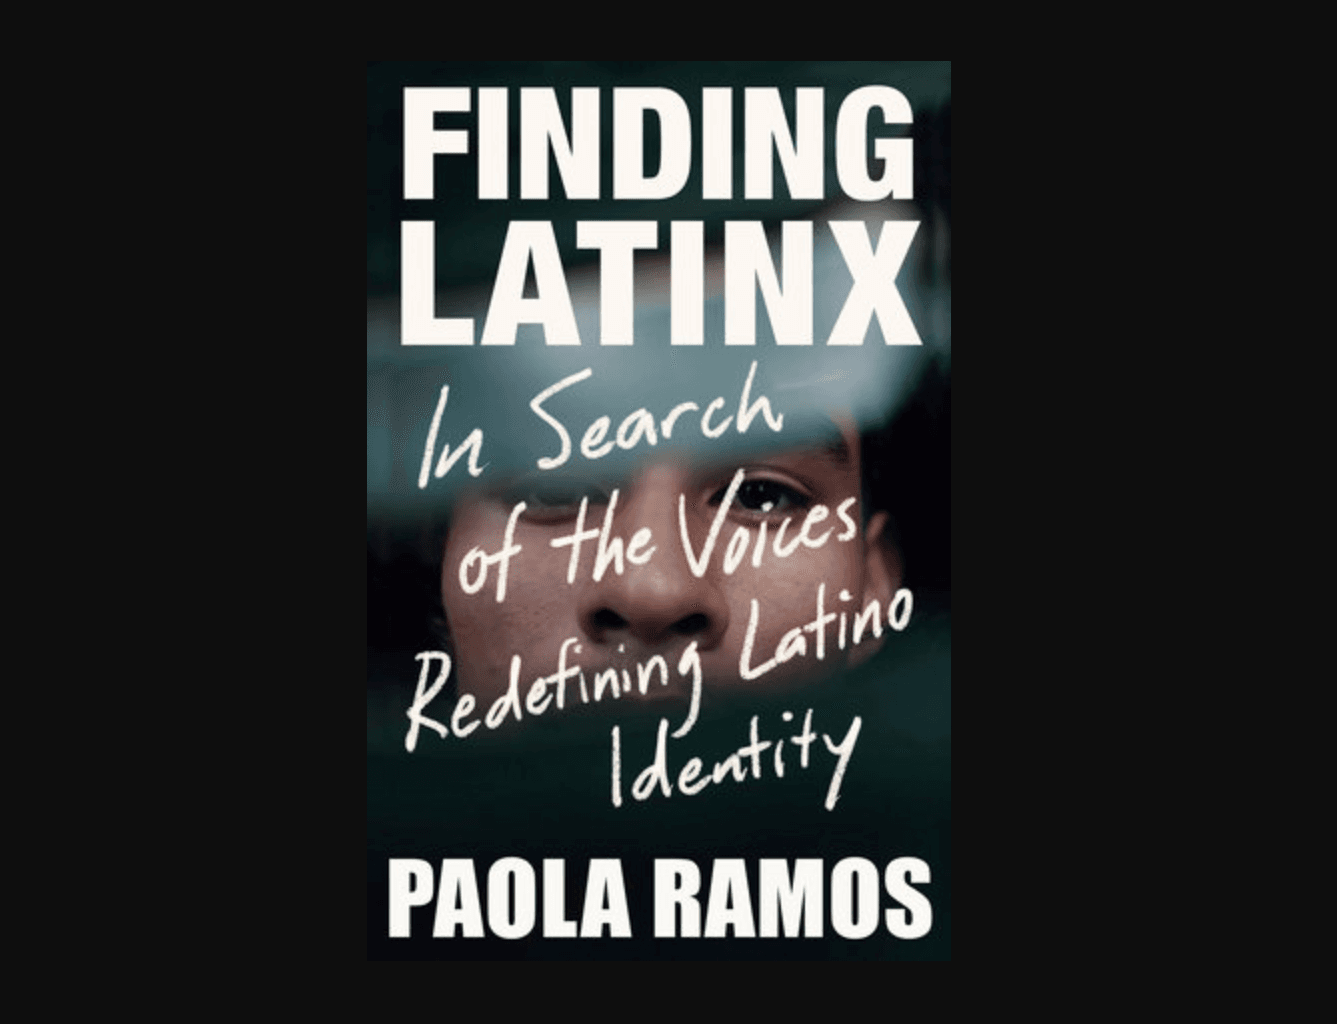 Thumbnail for "Finding Latinx (and the 2020 Election) With Paola Ramos".